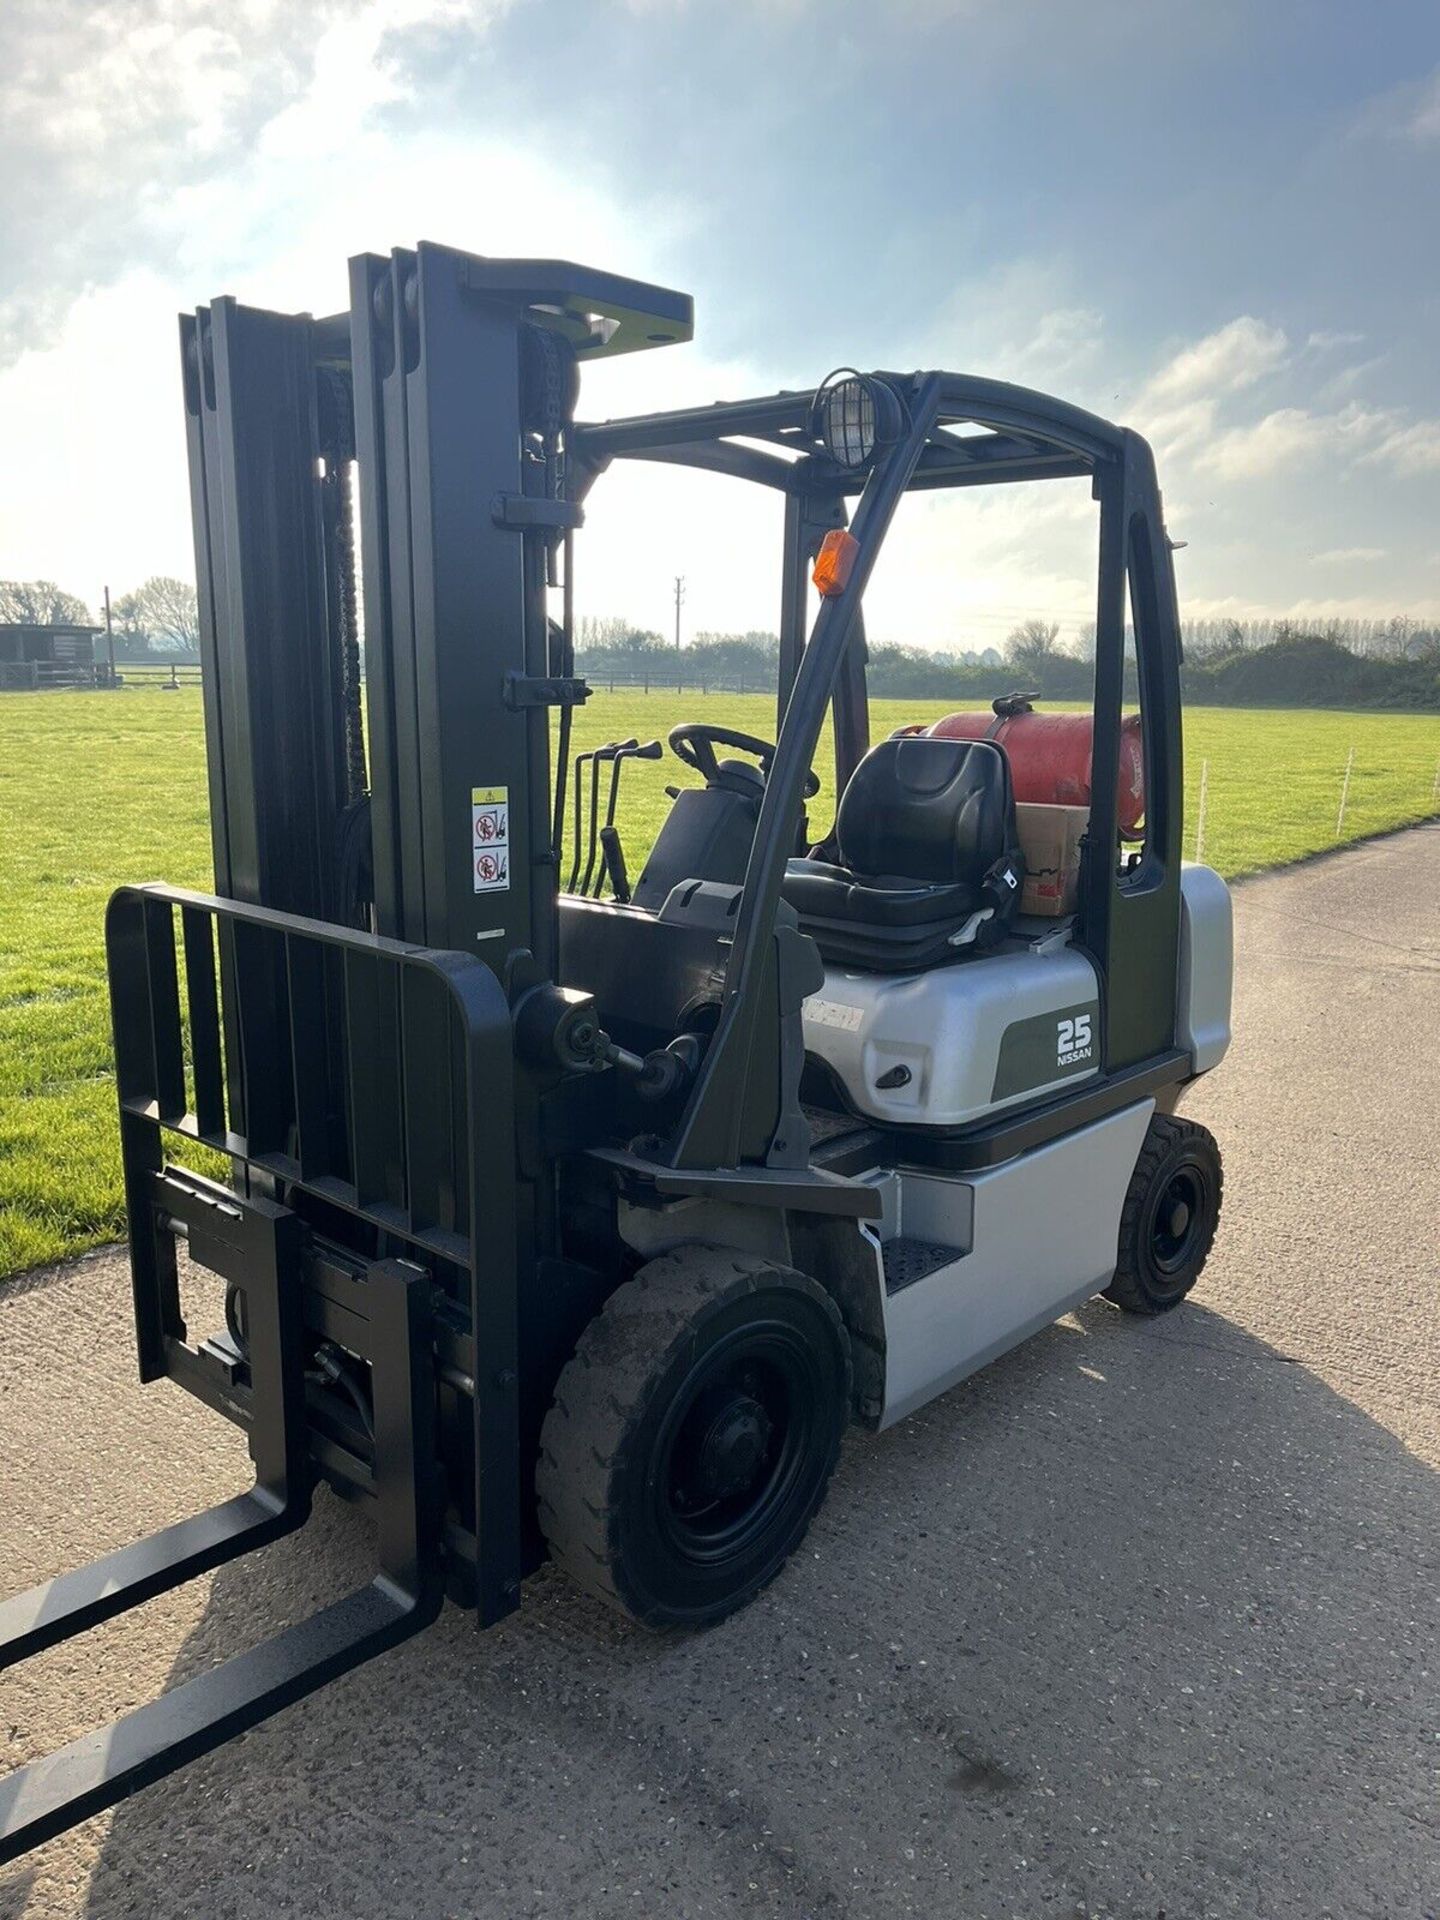 2015 - NISSAN 2.5 Gas Forklift Truck (Container Spec) - Image 2 of 5